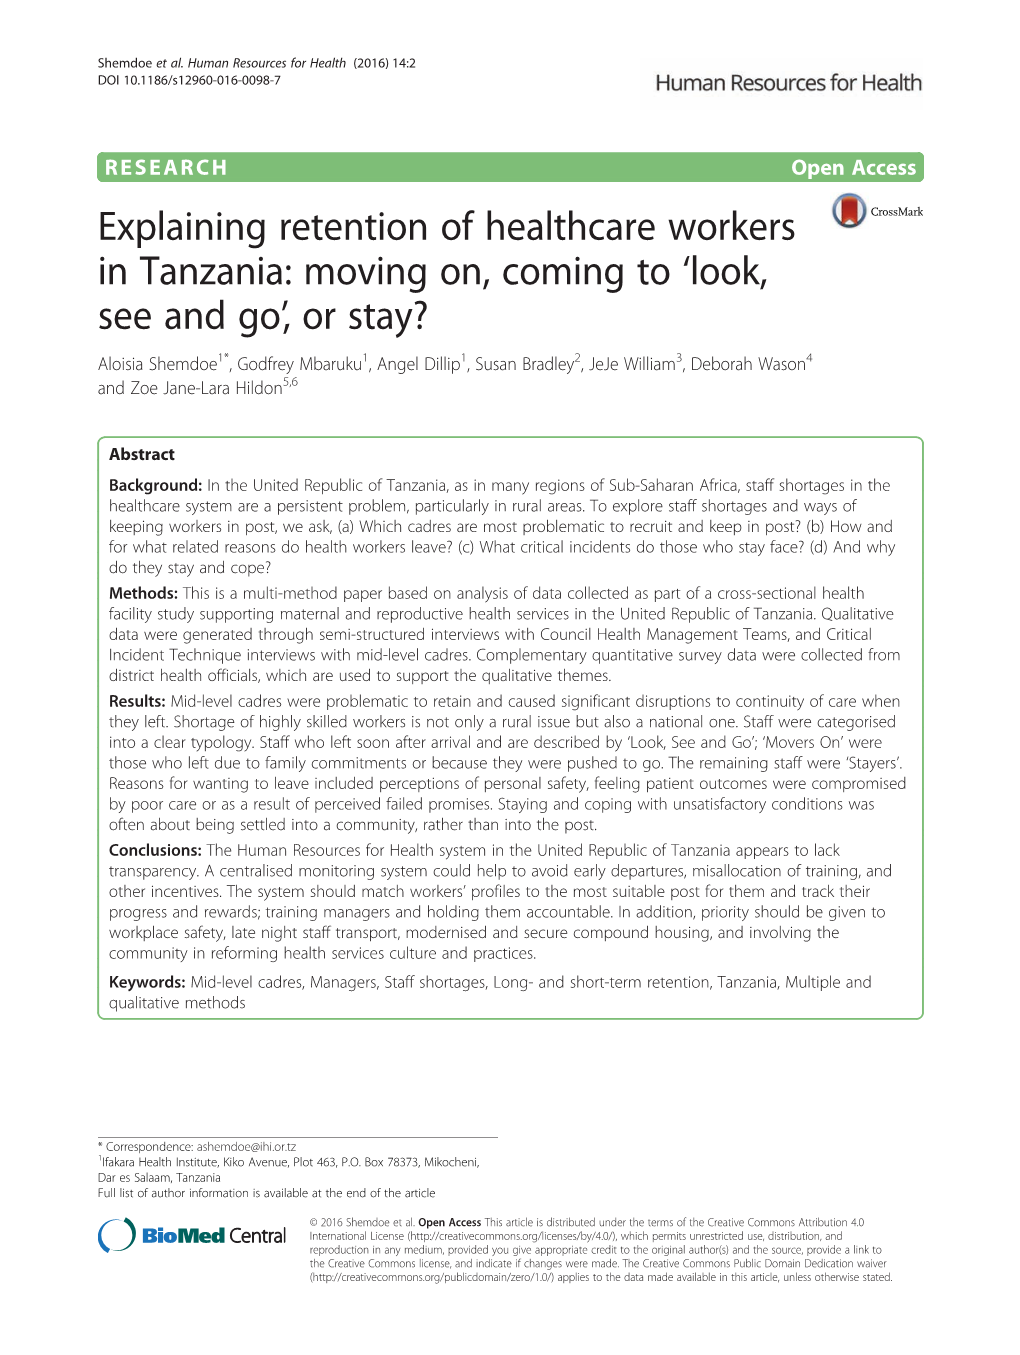 Explaining Retention of Healthcare Workers in Tanzania: Moving On